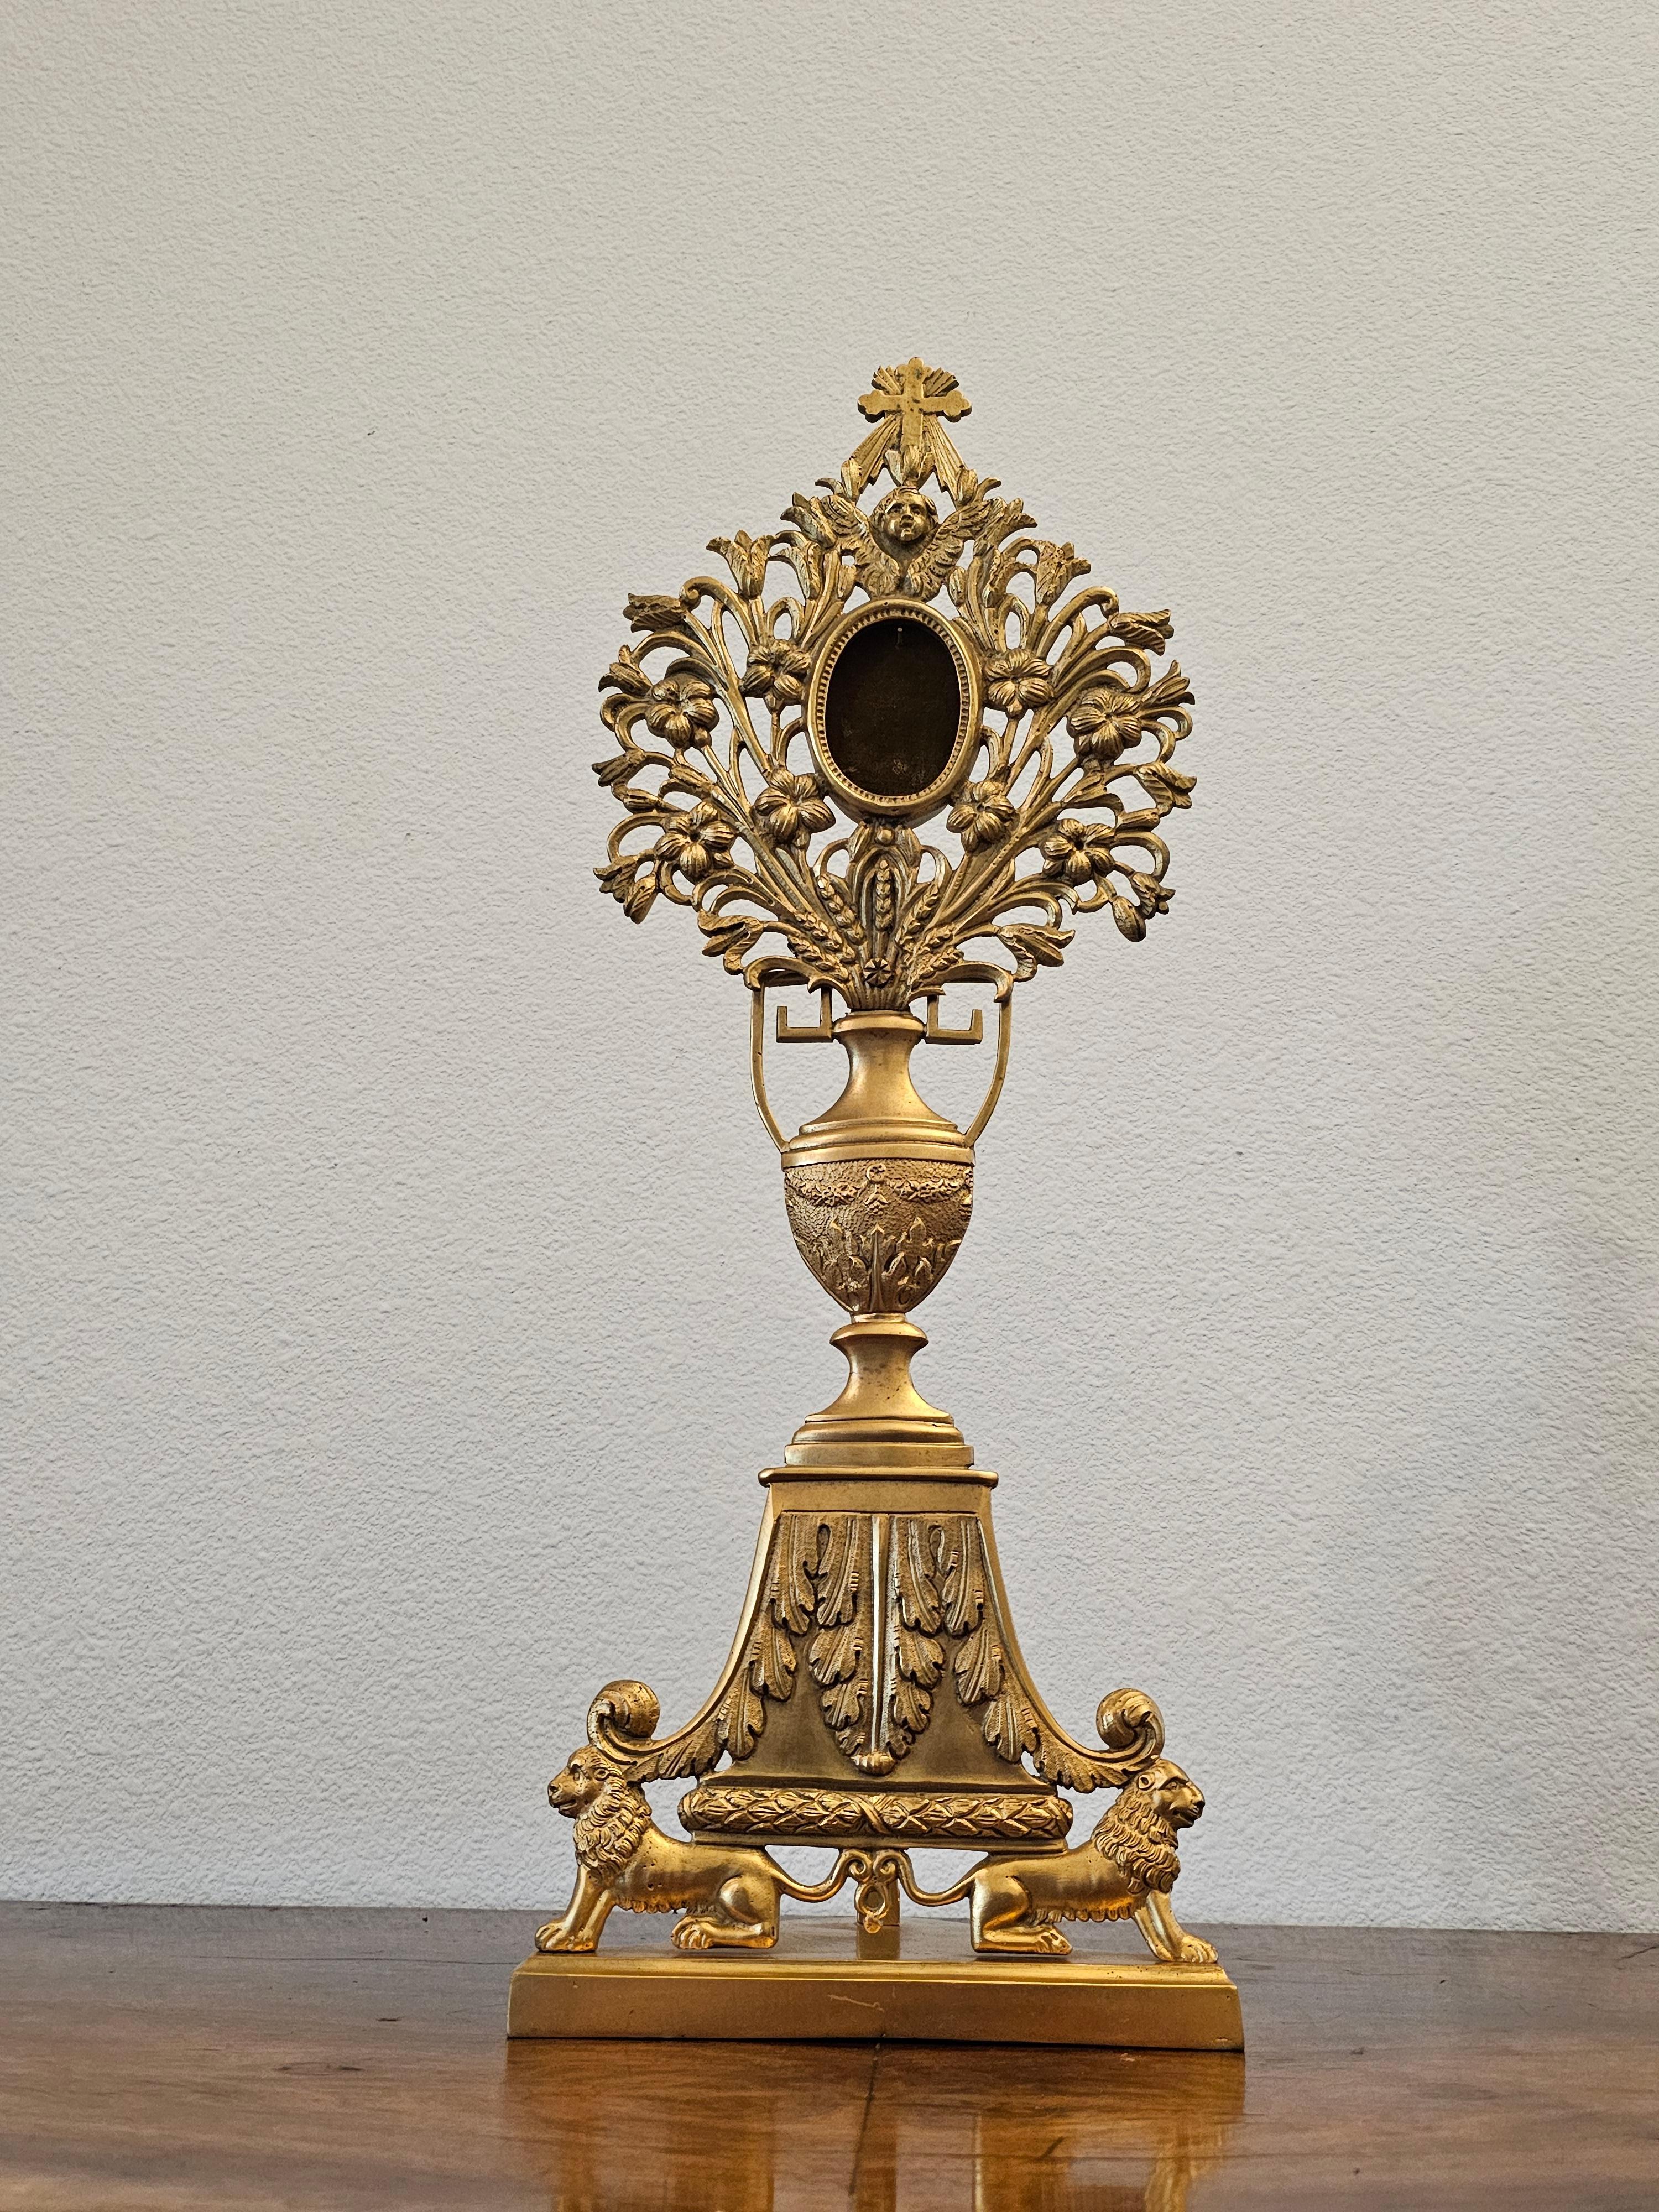 Fine 19th Century European Gilt Bronze Ormolu Monstrance Reliquary In Good Condition For Sale In Forney, TX